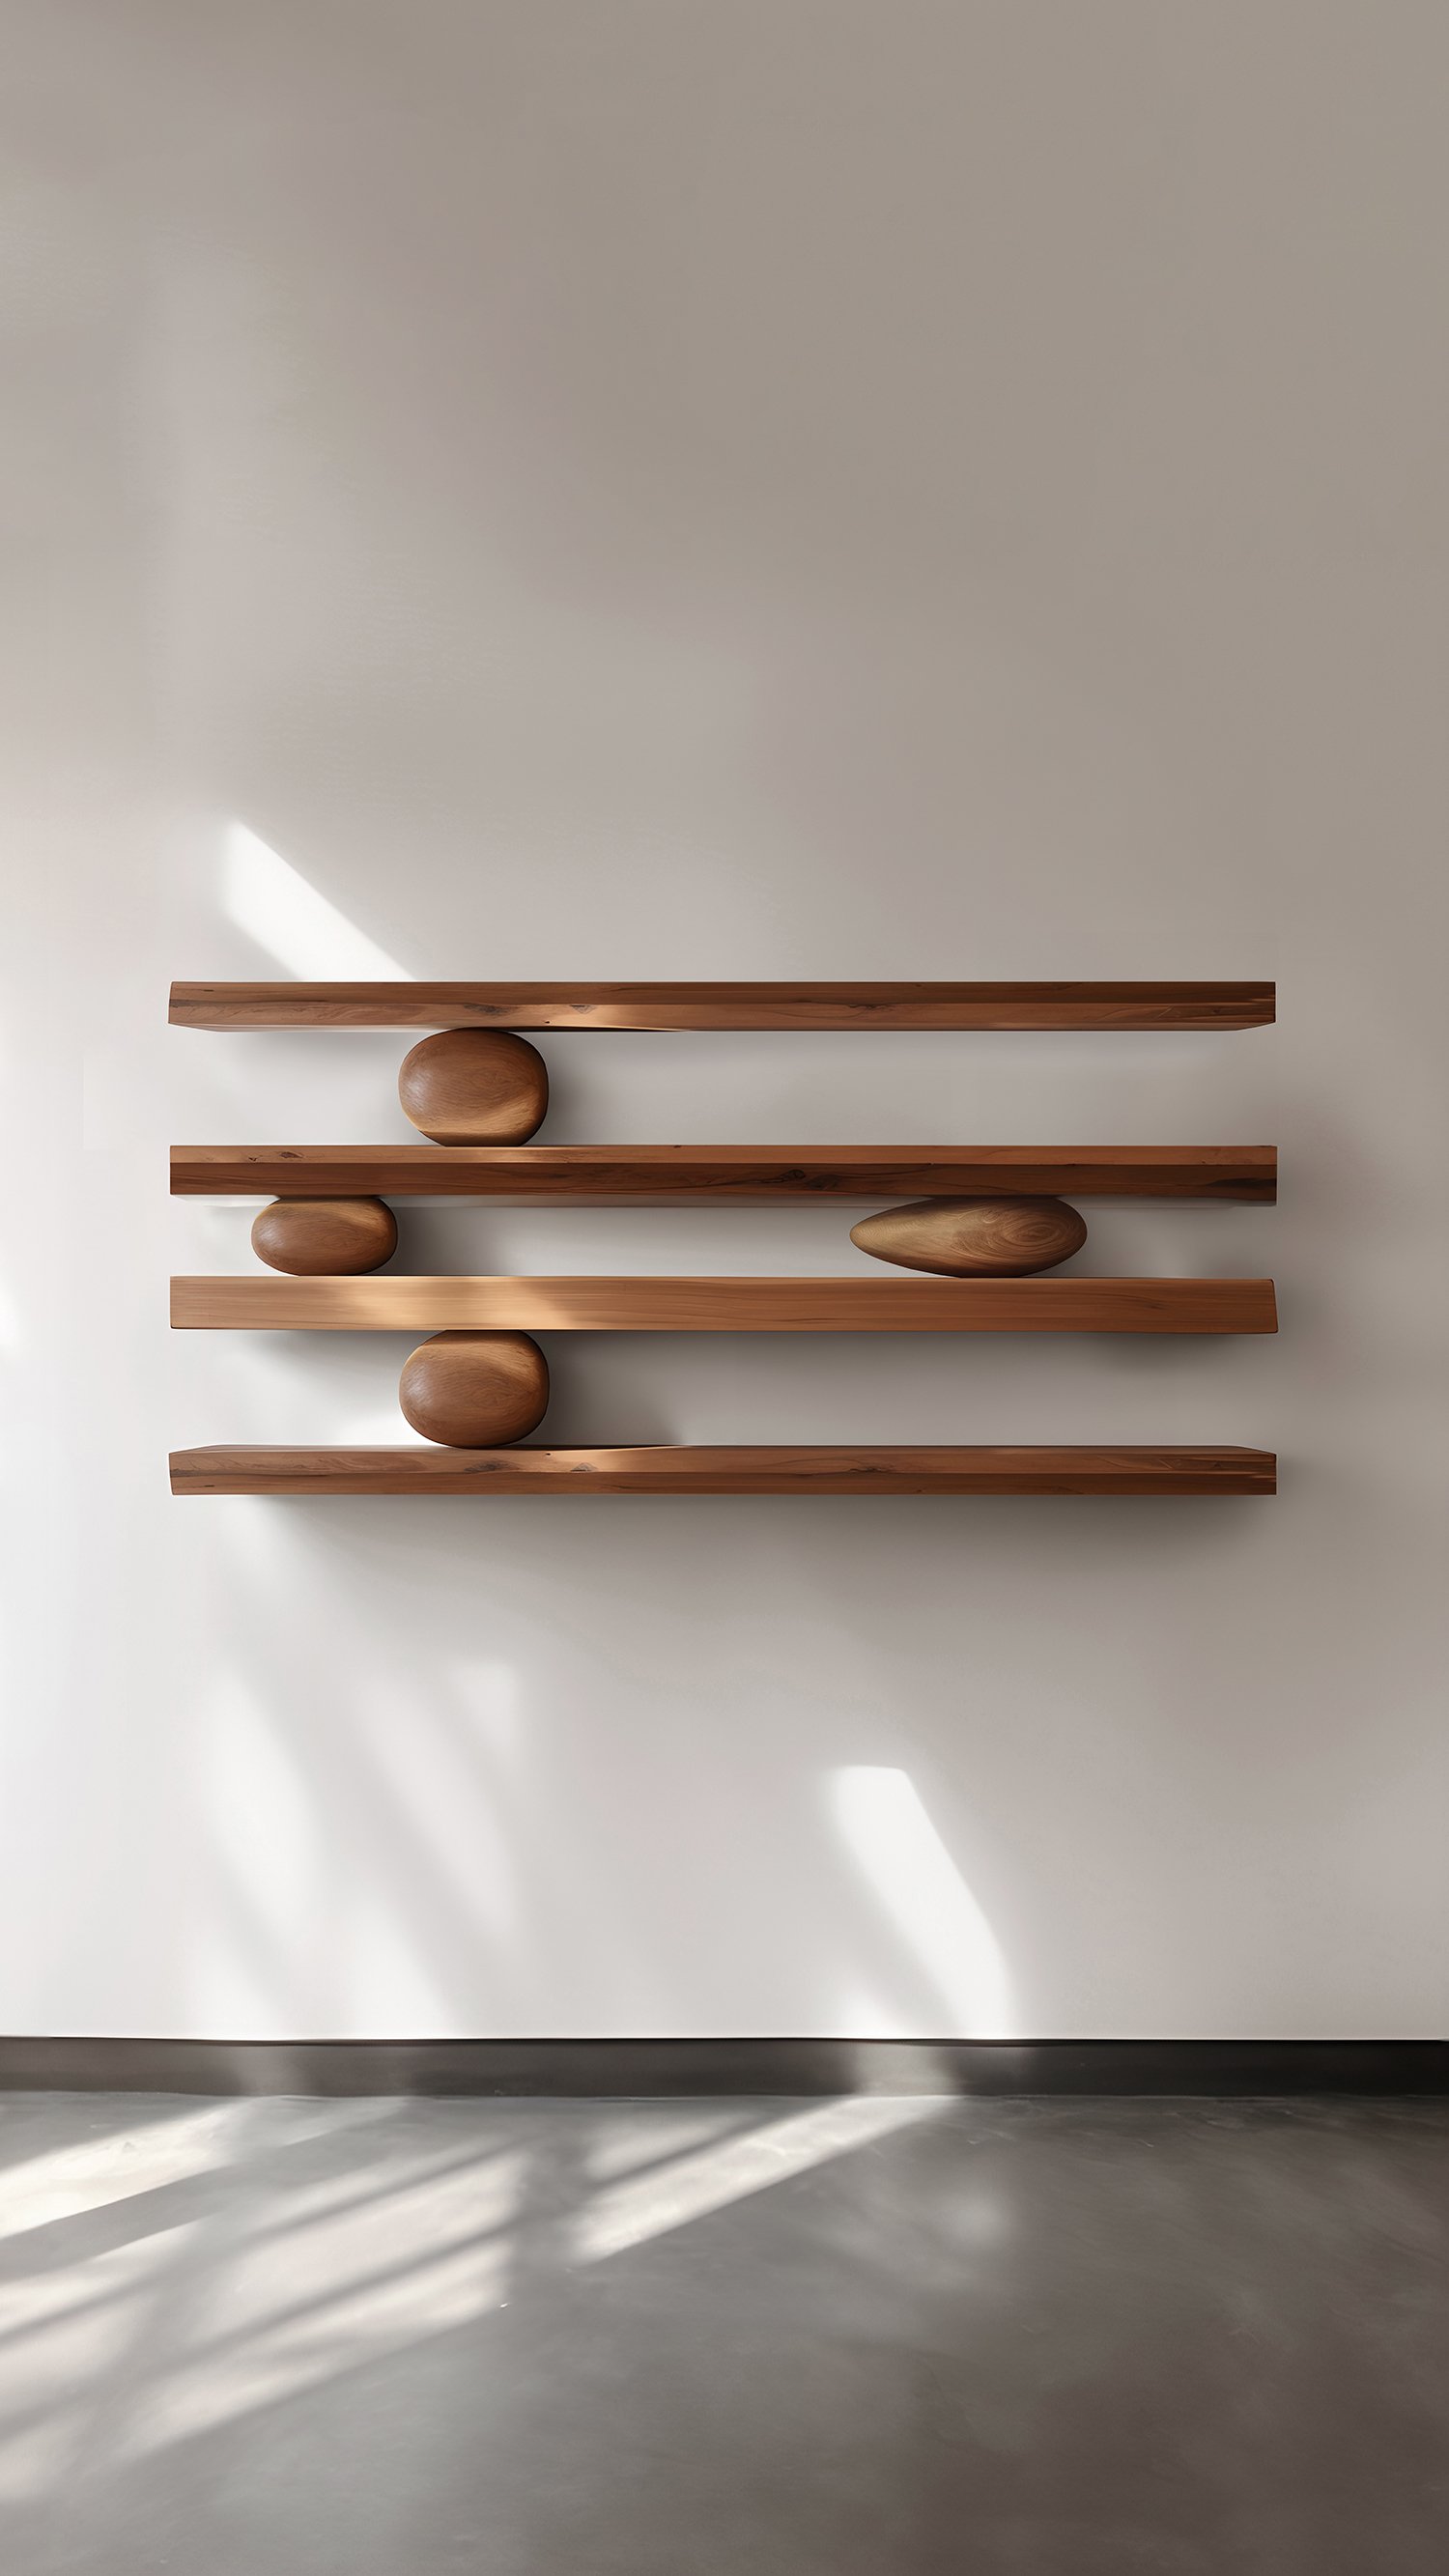 Set of Four Floating Shelves with Six Sculptural Wooden Pebble Accents, Sereno by Joel Escalona — 4.jpg